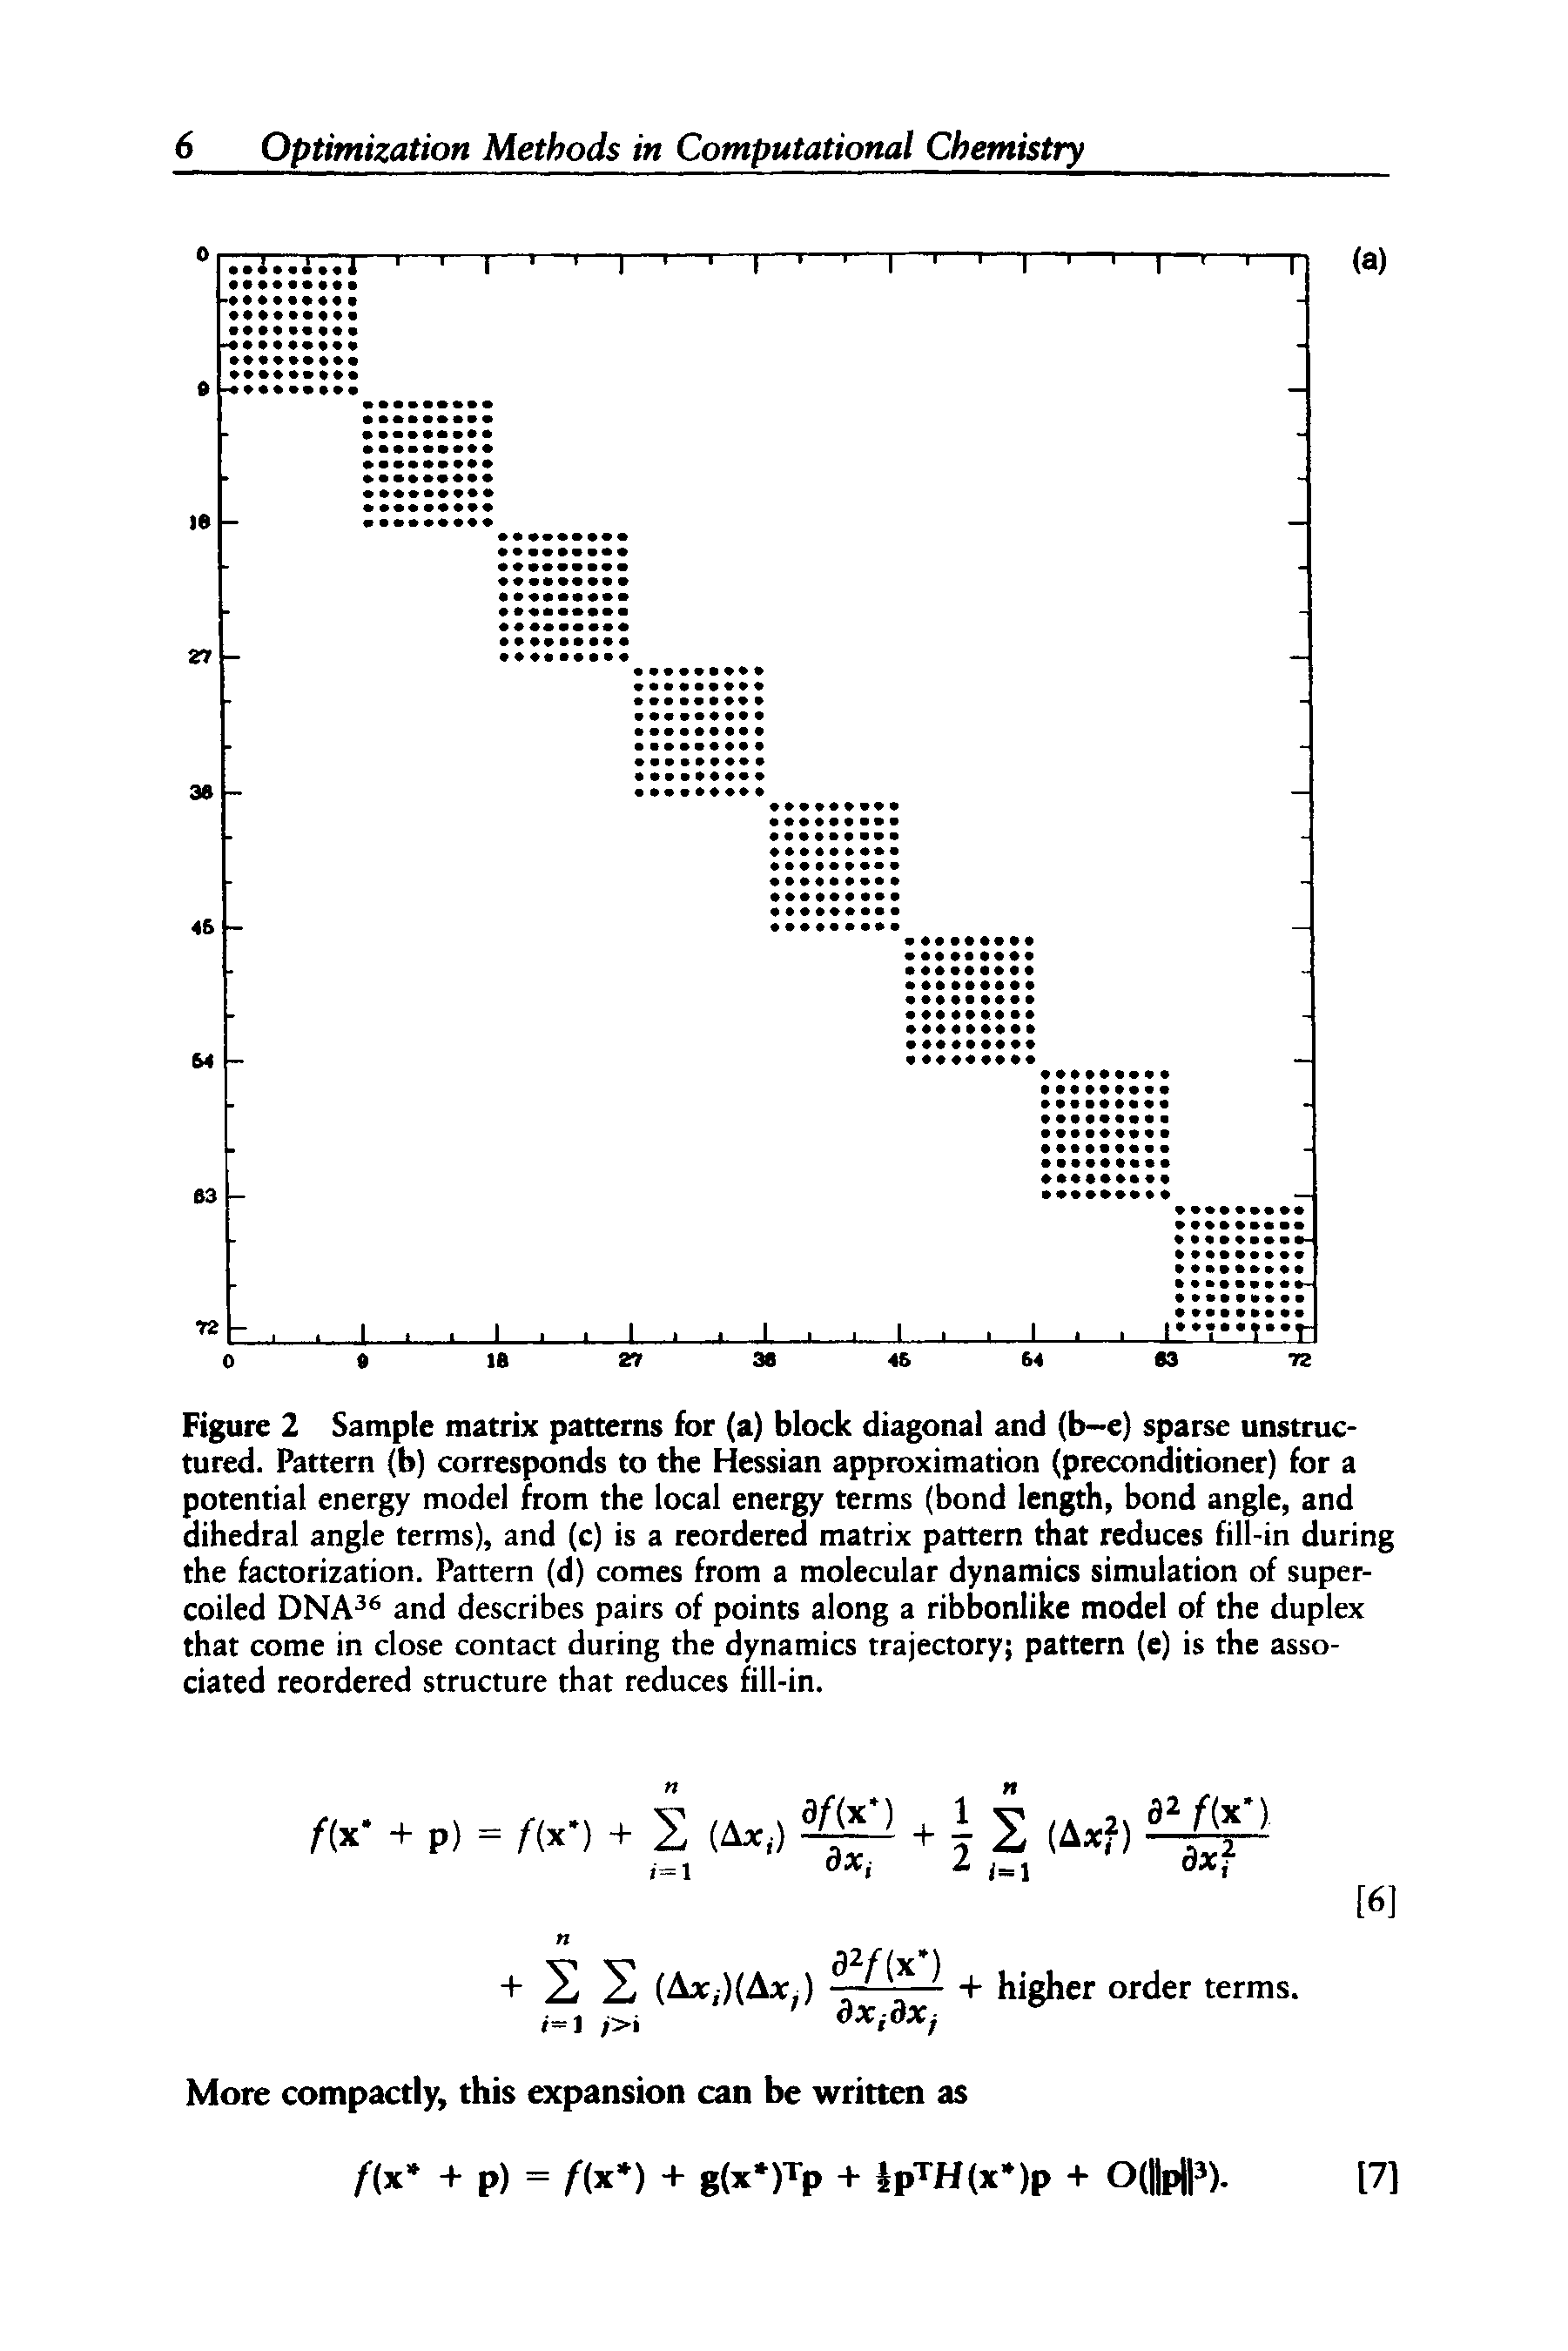 Figure 2 Sample matrix patterns for (a) block diagonal and (b-e) sparse unstructured. Pattern (b) corresponds to the Hessian approximation (preconditioner) for a potential energy model from the local energy terms (bond length, bond angle, and dihedral angle terms), and (c) is a reordered matrix pattern that reduces fill-in during the factorization. Pattern (d) comes from a molecular dynamics simulation of super-coiled DNA36 and describes pairs of points along a ribbonlike model of the duplex that come in close contact during the dynamics trajectory pattern (e) is the associated reordered structure that reduces fill-in.